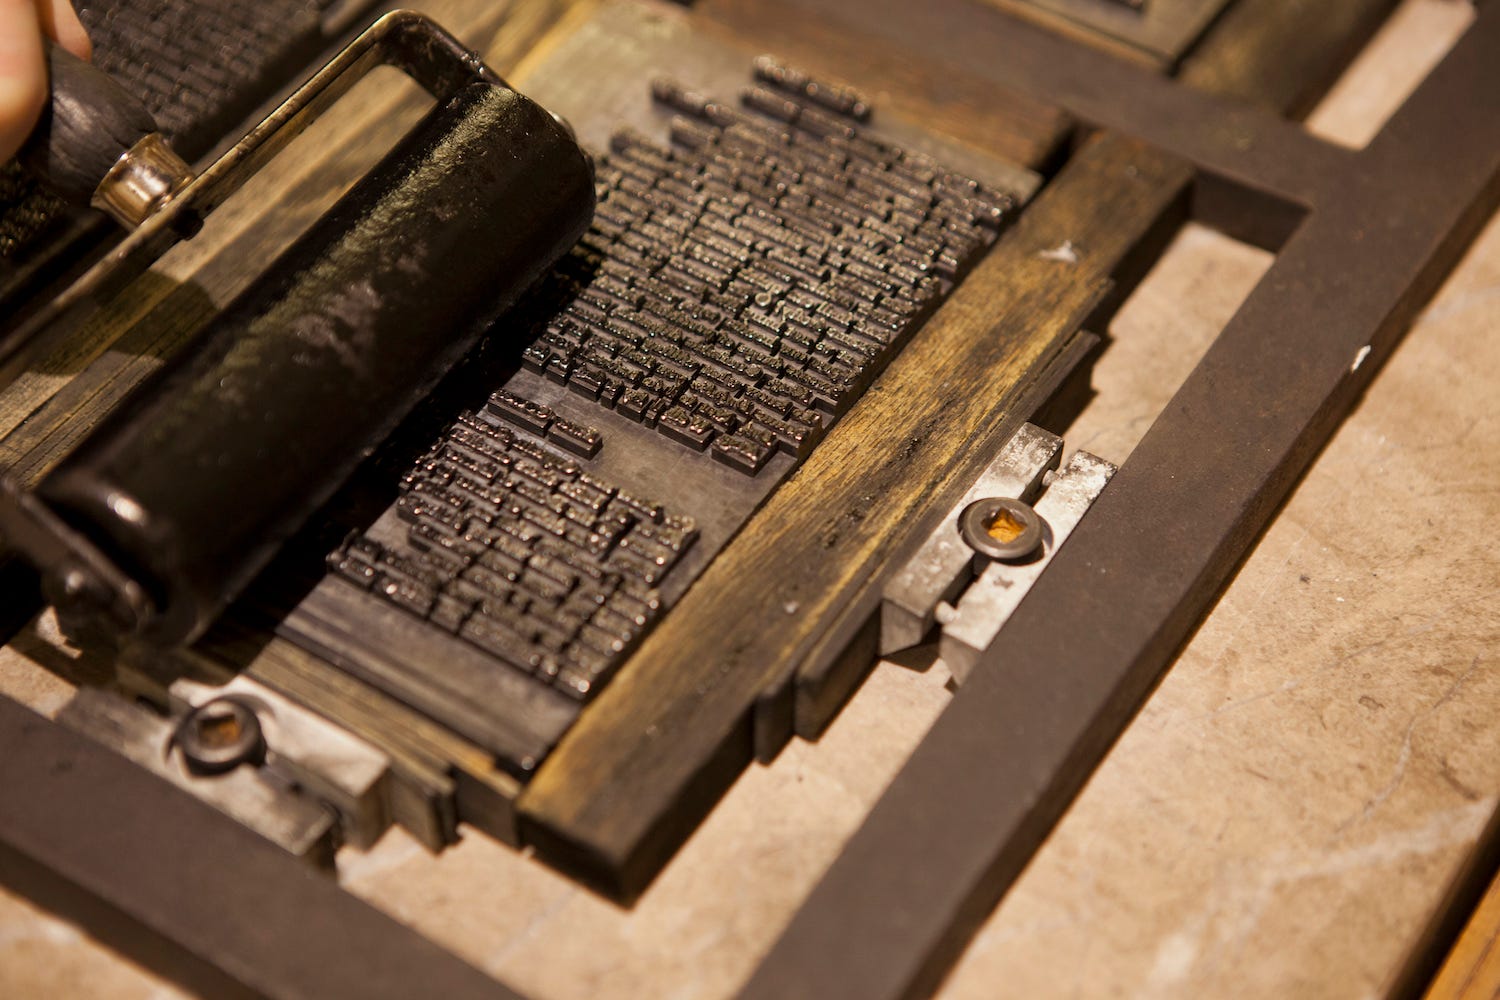 Publishing Shakespeare: a of the printing press | by Shakespeare's Globe | Medium